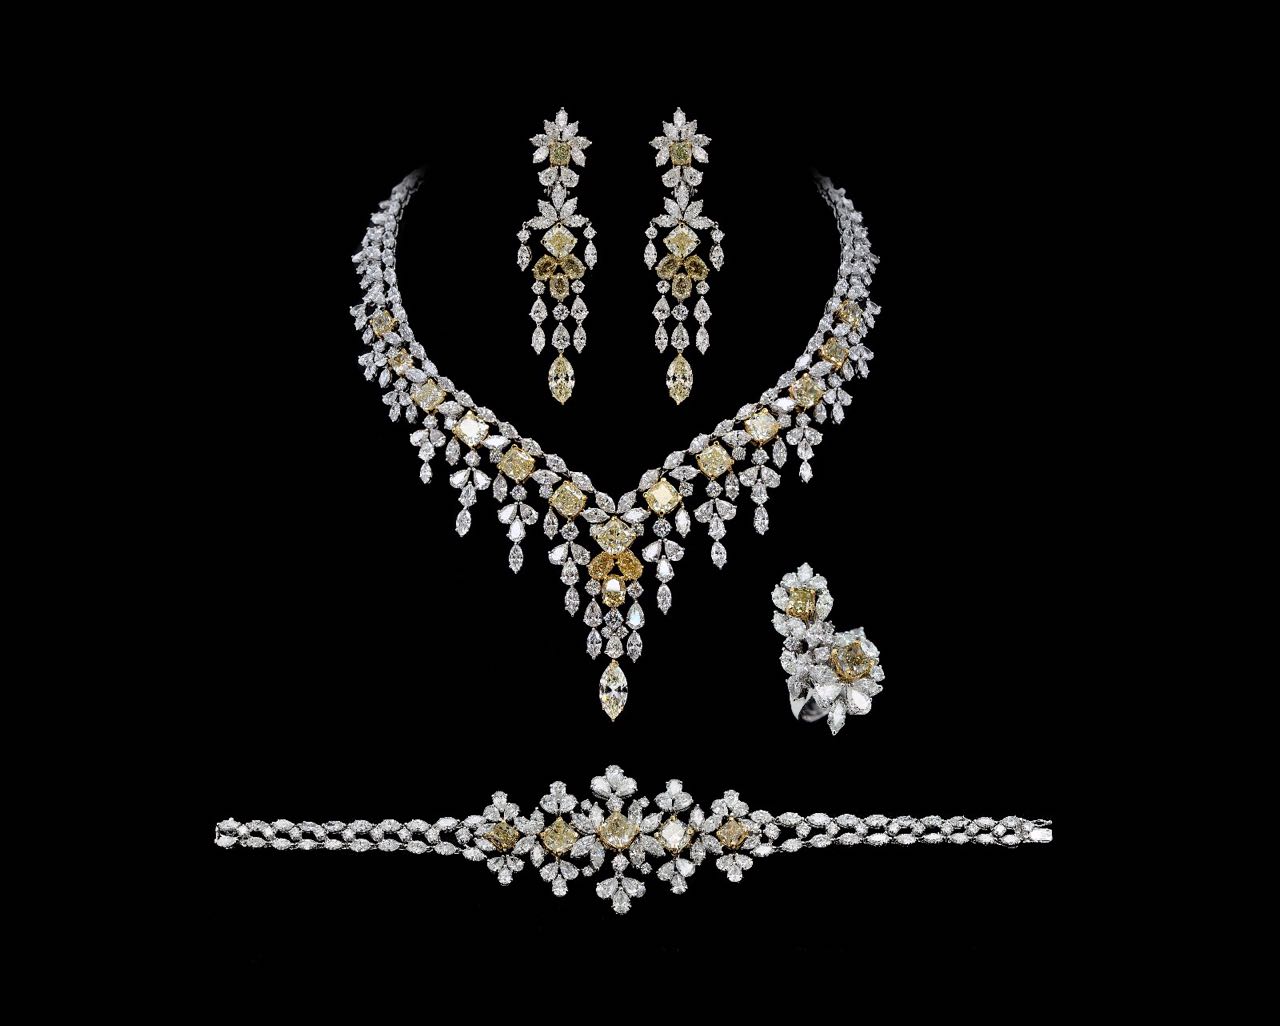 Diamond earring, necklace and ring set